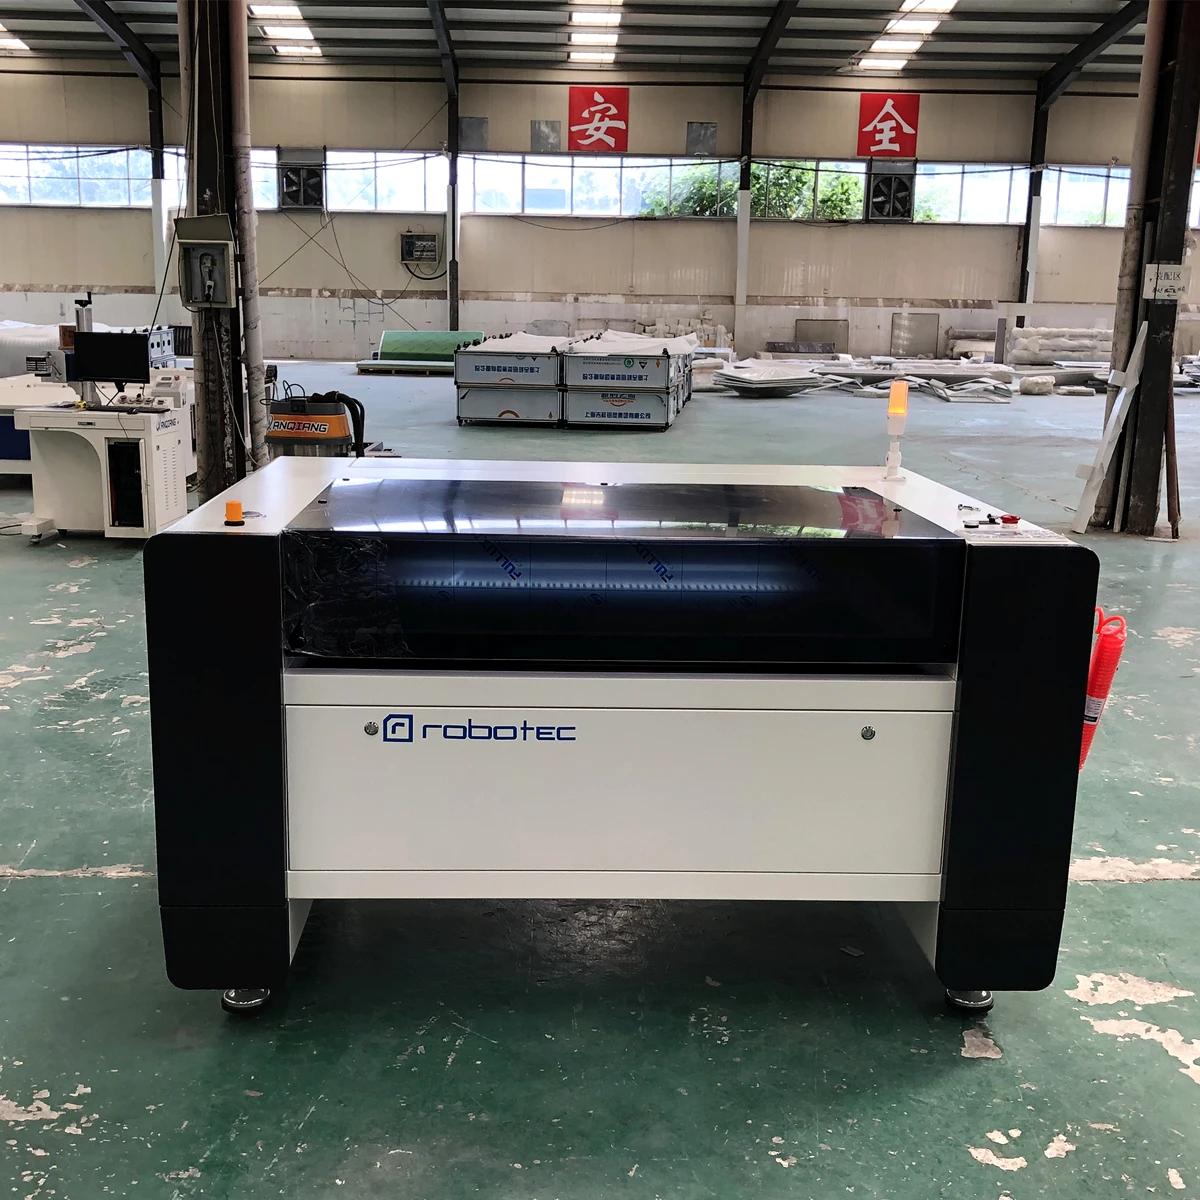 

4x3 Feet Size Co2 Laser Cutter Machine 1390 Cheap Price Engraving Cutting Machine For Adverting Industry